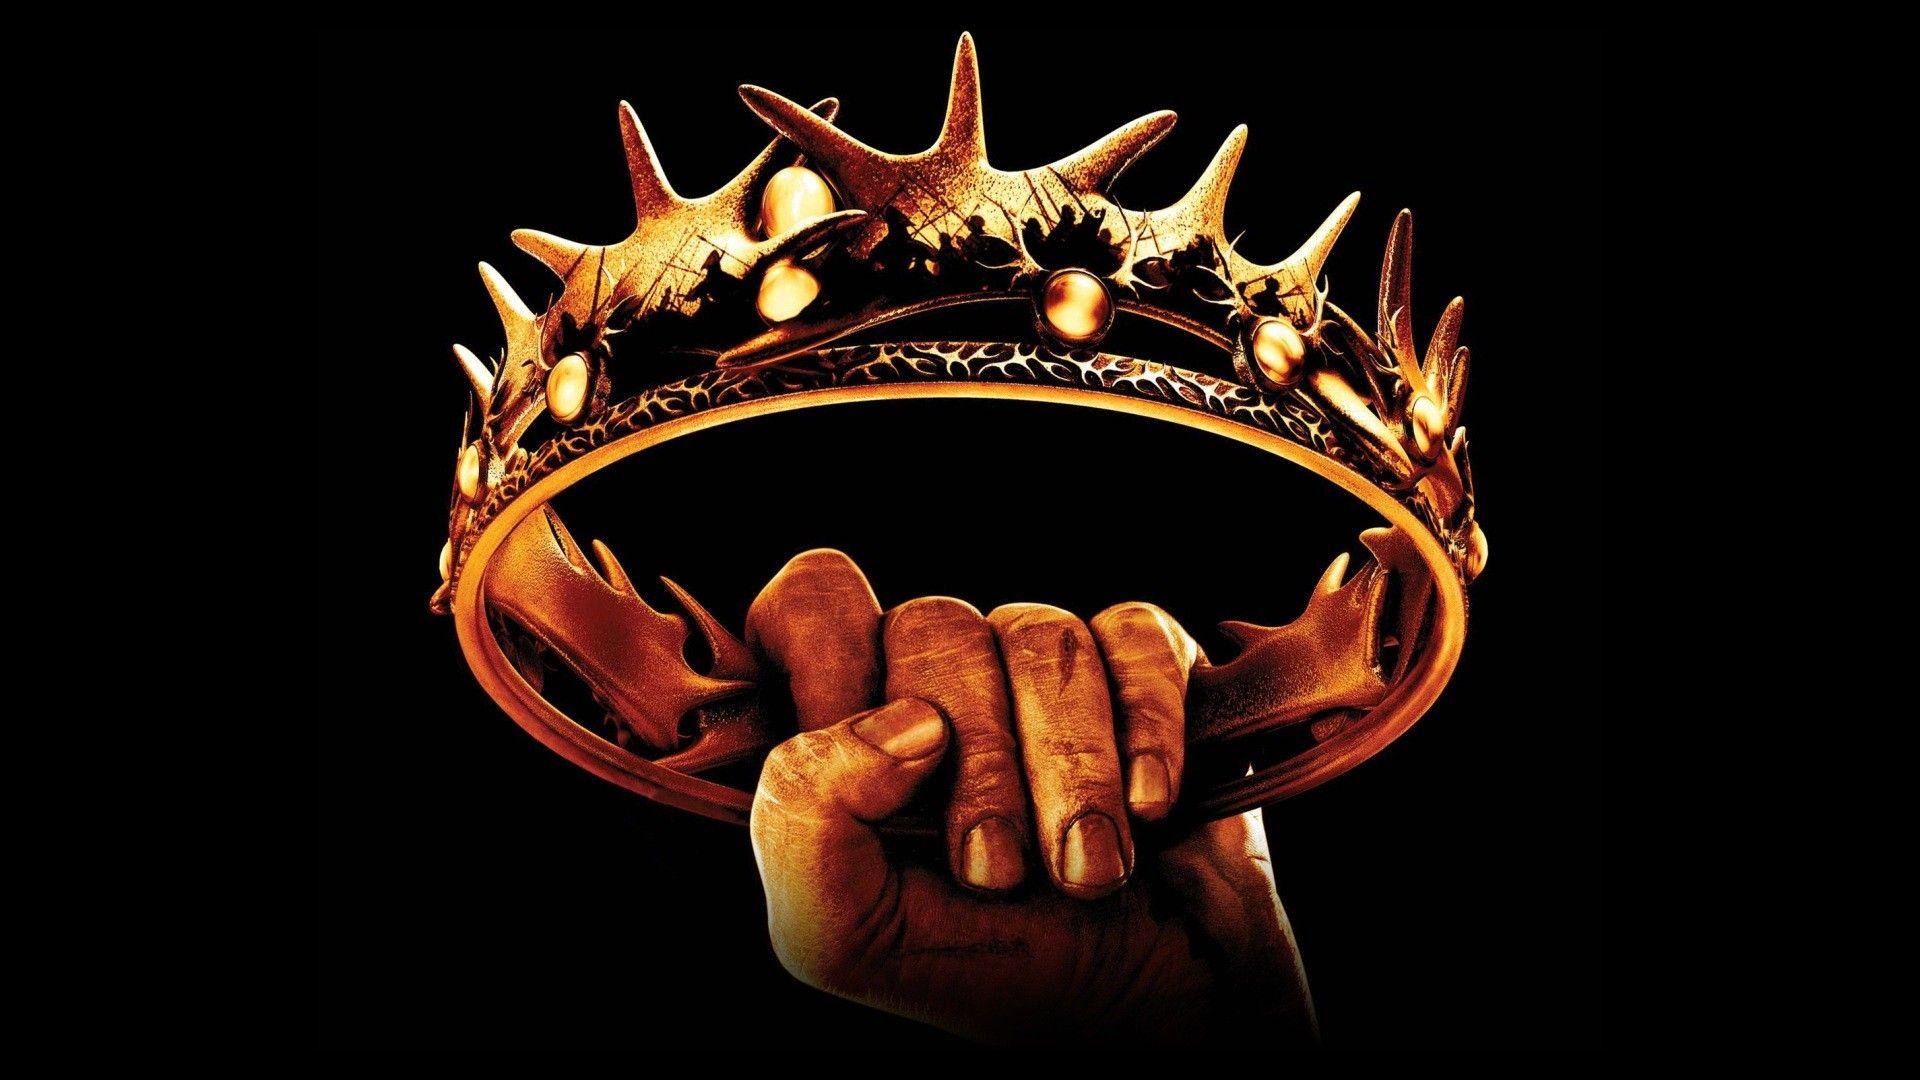 hands, gold, Game of Thrones, Kings, crown wallpaper